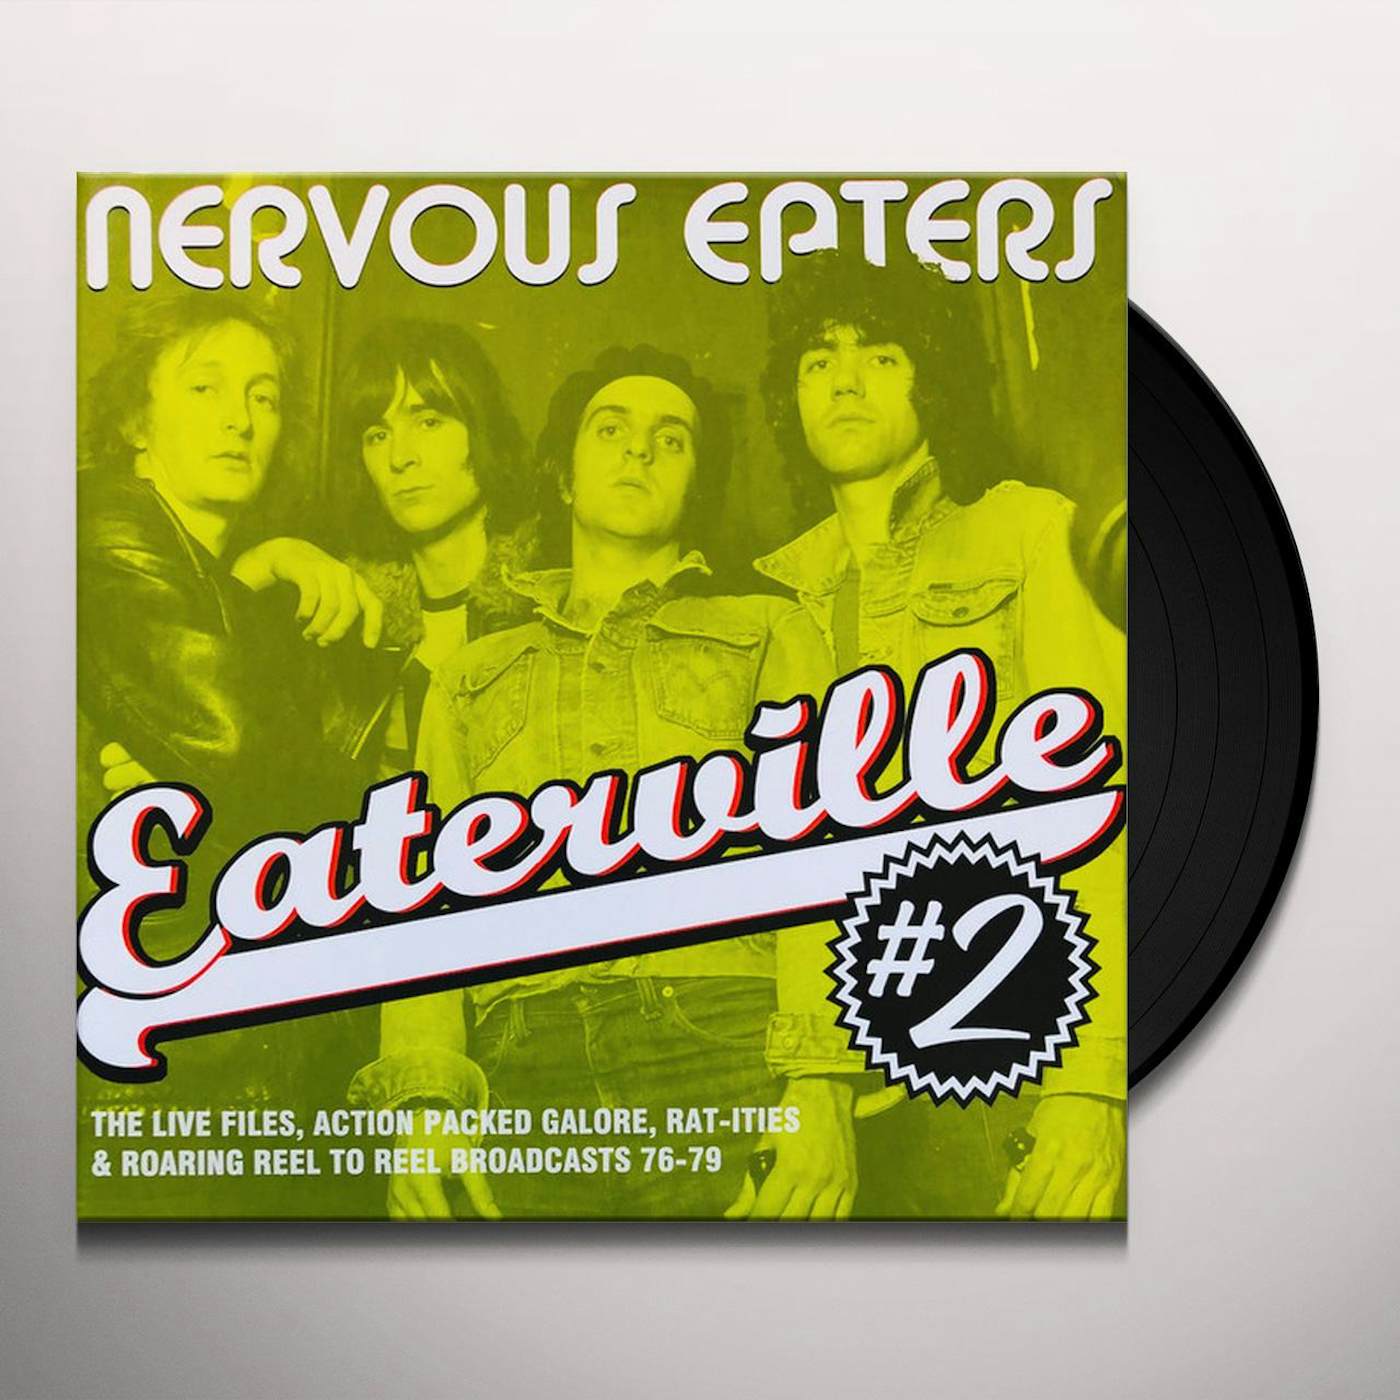 Nervous Eaters EATERVILLE #2: LIVE FILES, ACTION PACKED GALORE, RAT-ITIES & ROARING REEL TO REEL BROADCASTS 76-79 Vinyl Record